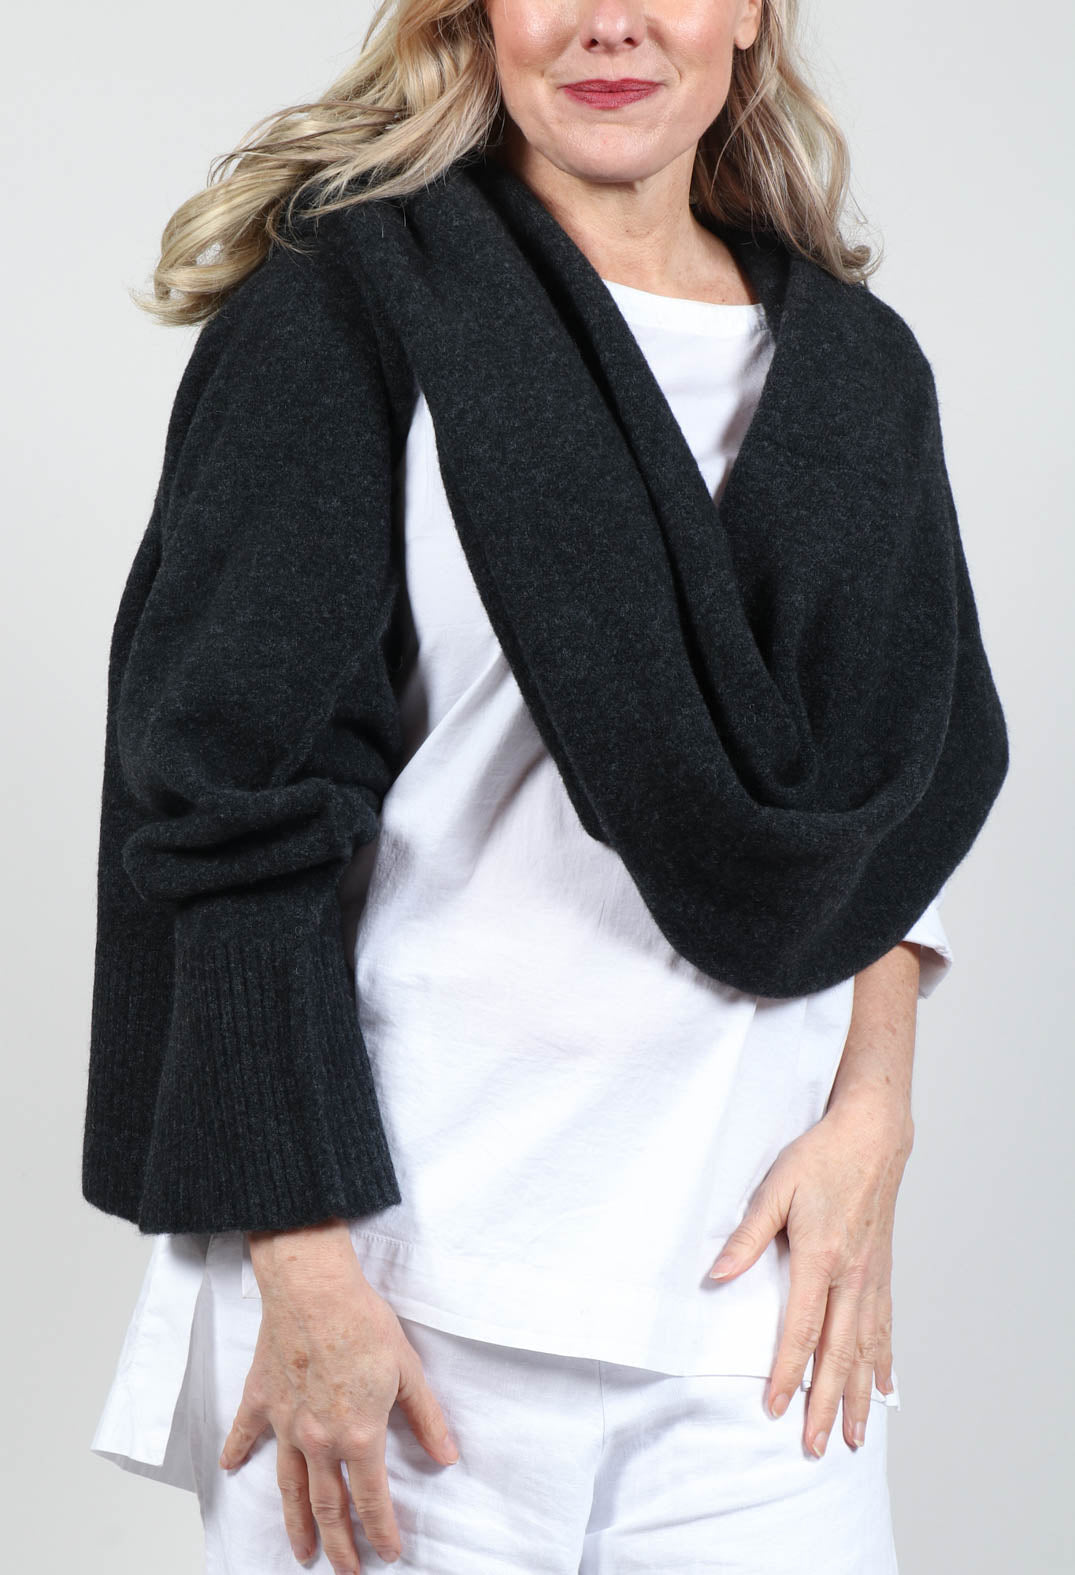 Wrap Around Scarf with Sleeve in Graphite